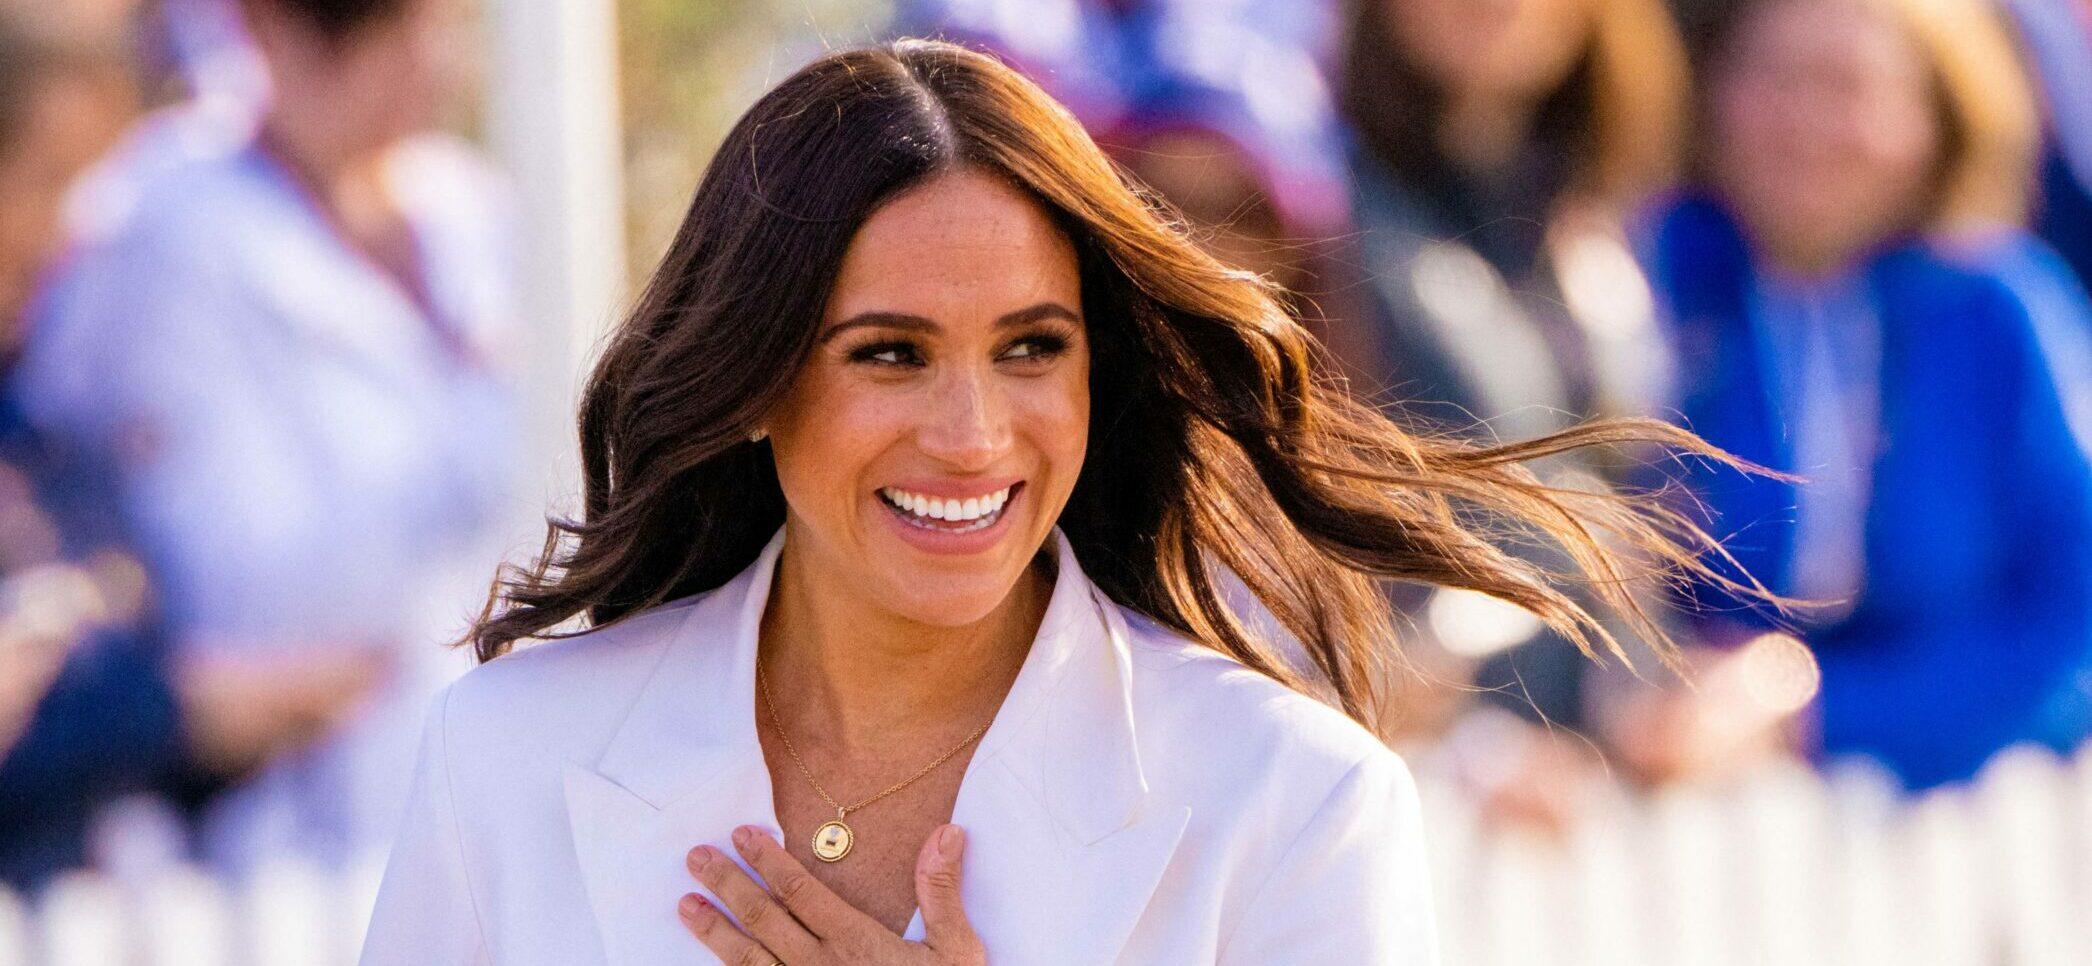 Meghan Markle Enters Her Influencing Era Featuring In Instagram Ad For Latte Brand